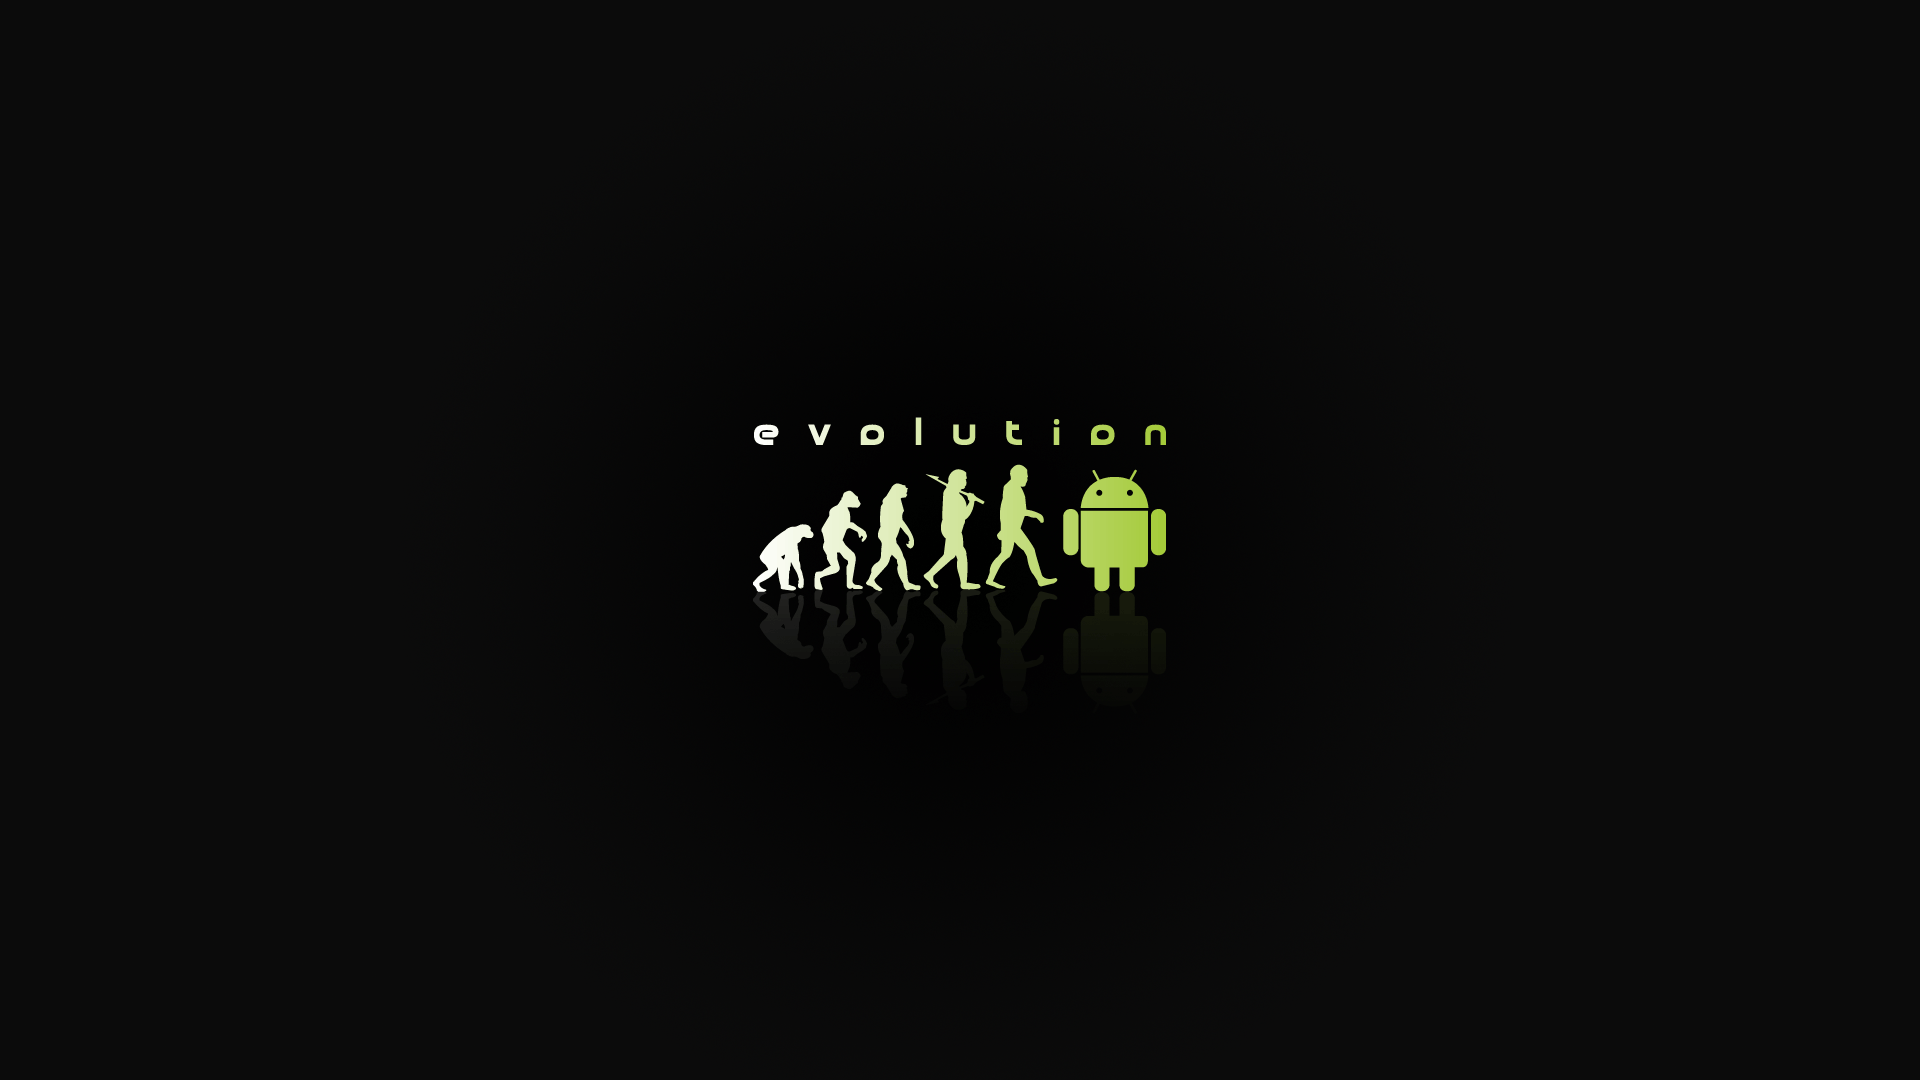 True evolution. Android vs Apple. Wallpaper and Android